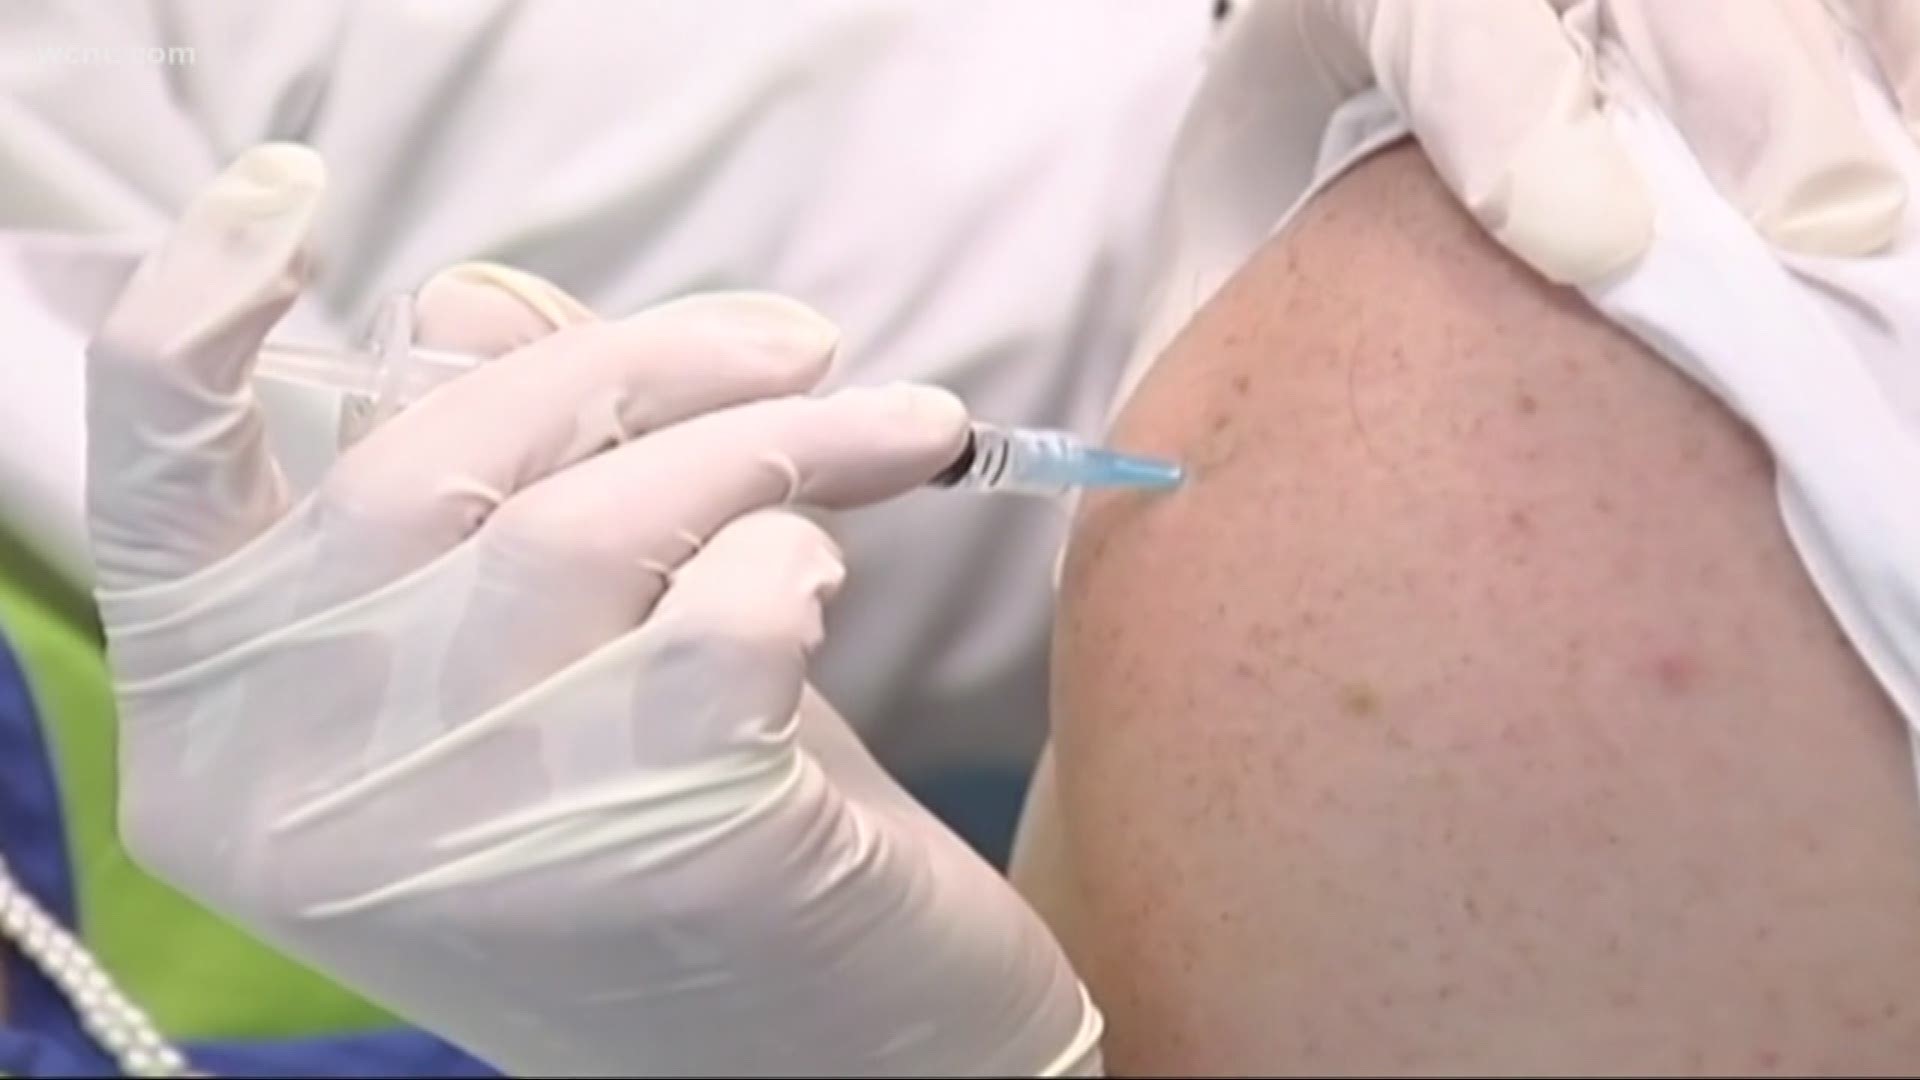 The vaccine is reportedly about 10 percent effective